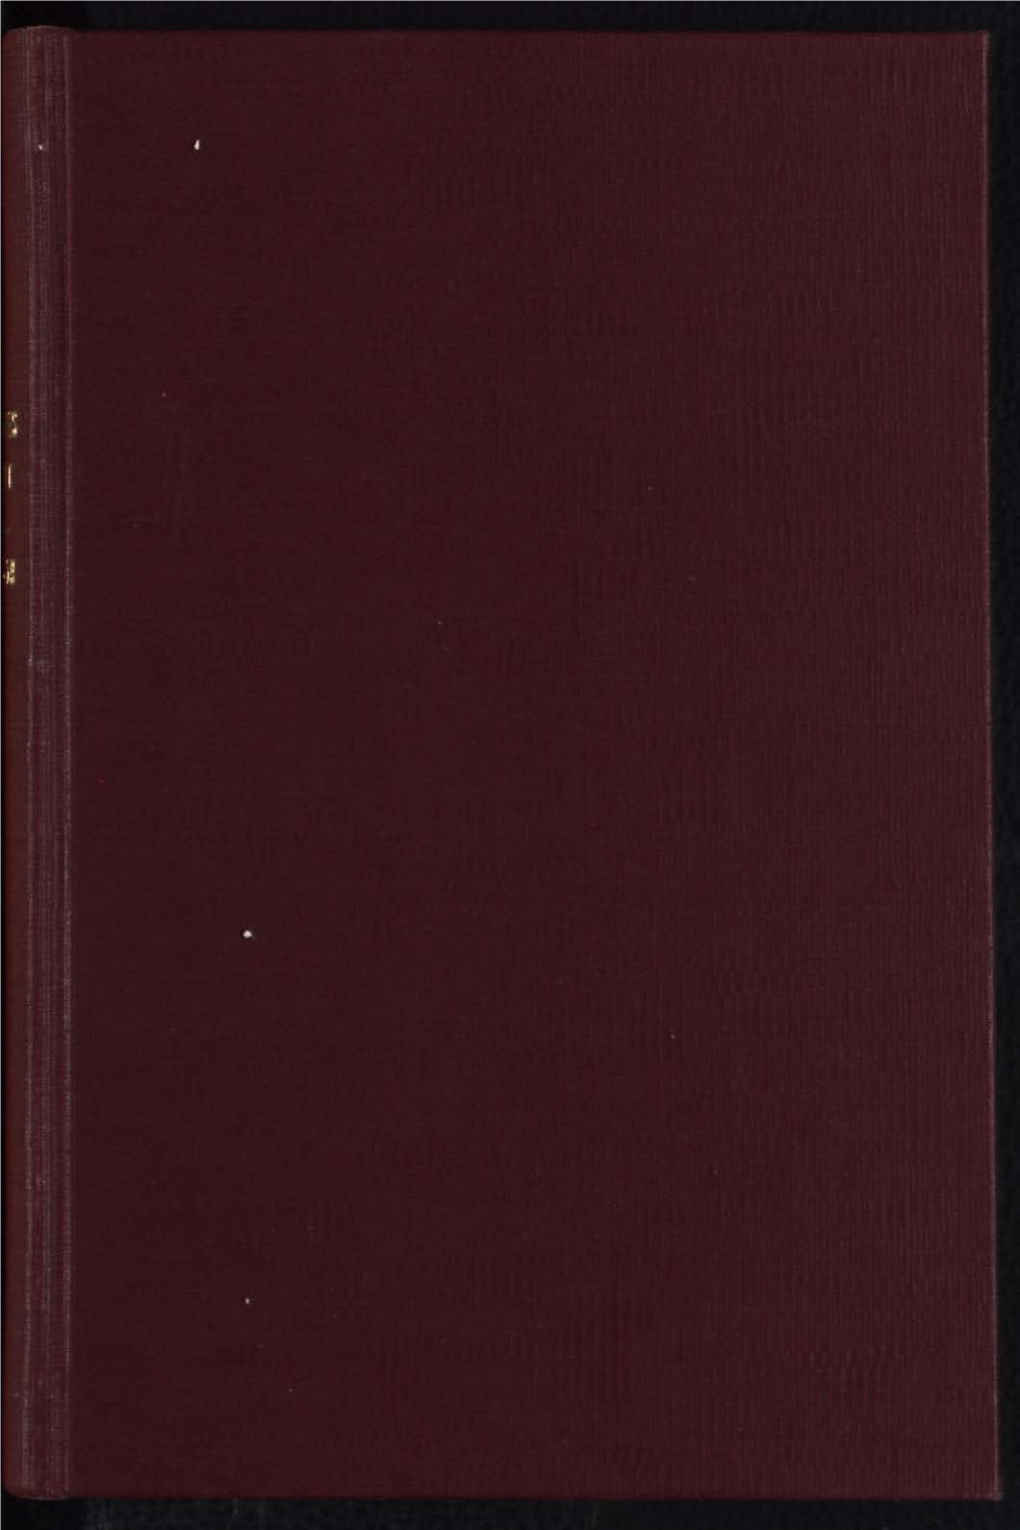 Annual Report 1958-59-, Which Also Contains Lists of Its Scientific Staff and Various Publications